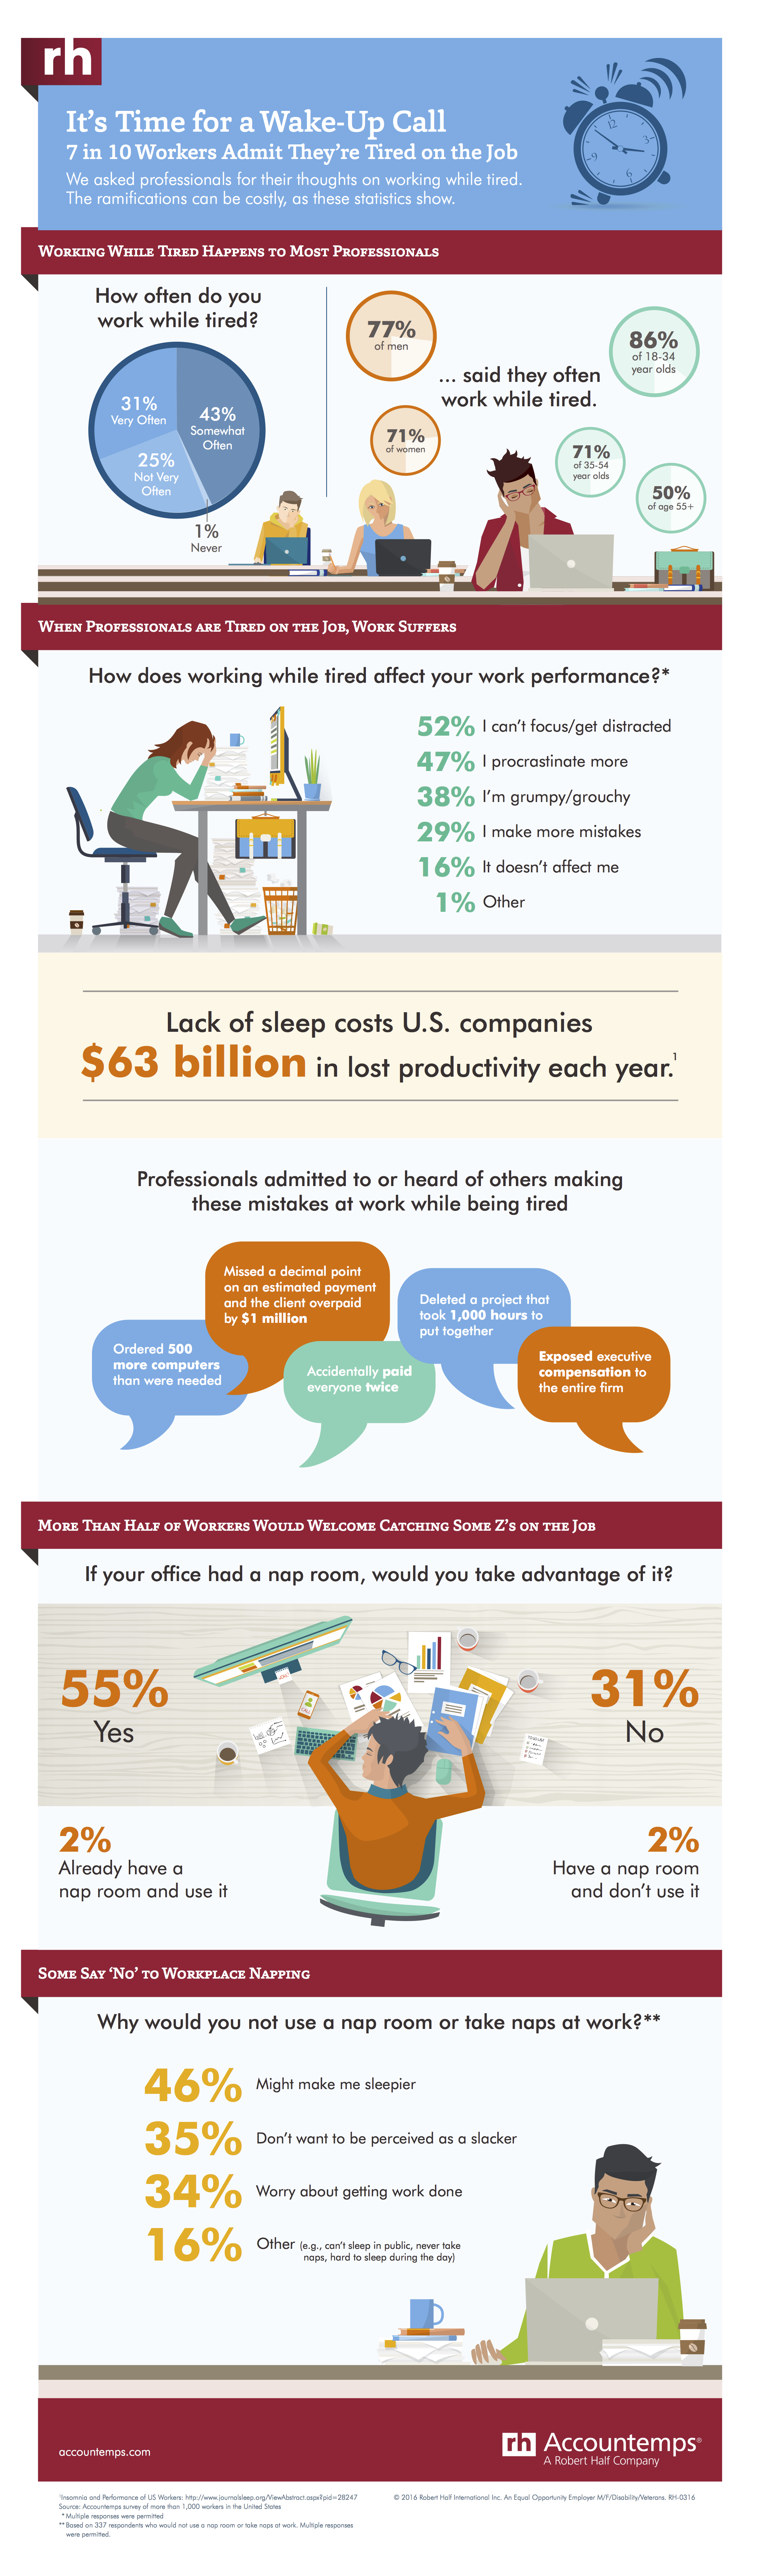 Sleep Survey Infographic - Insufficient Sleep at Work has Consequences